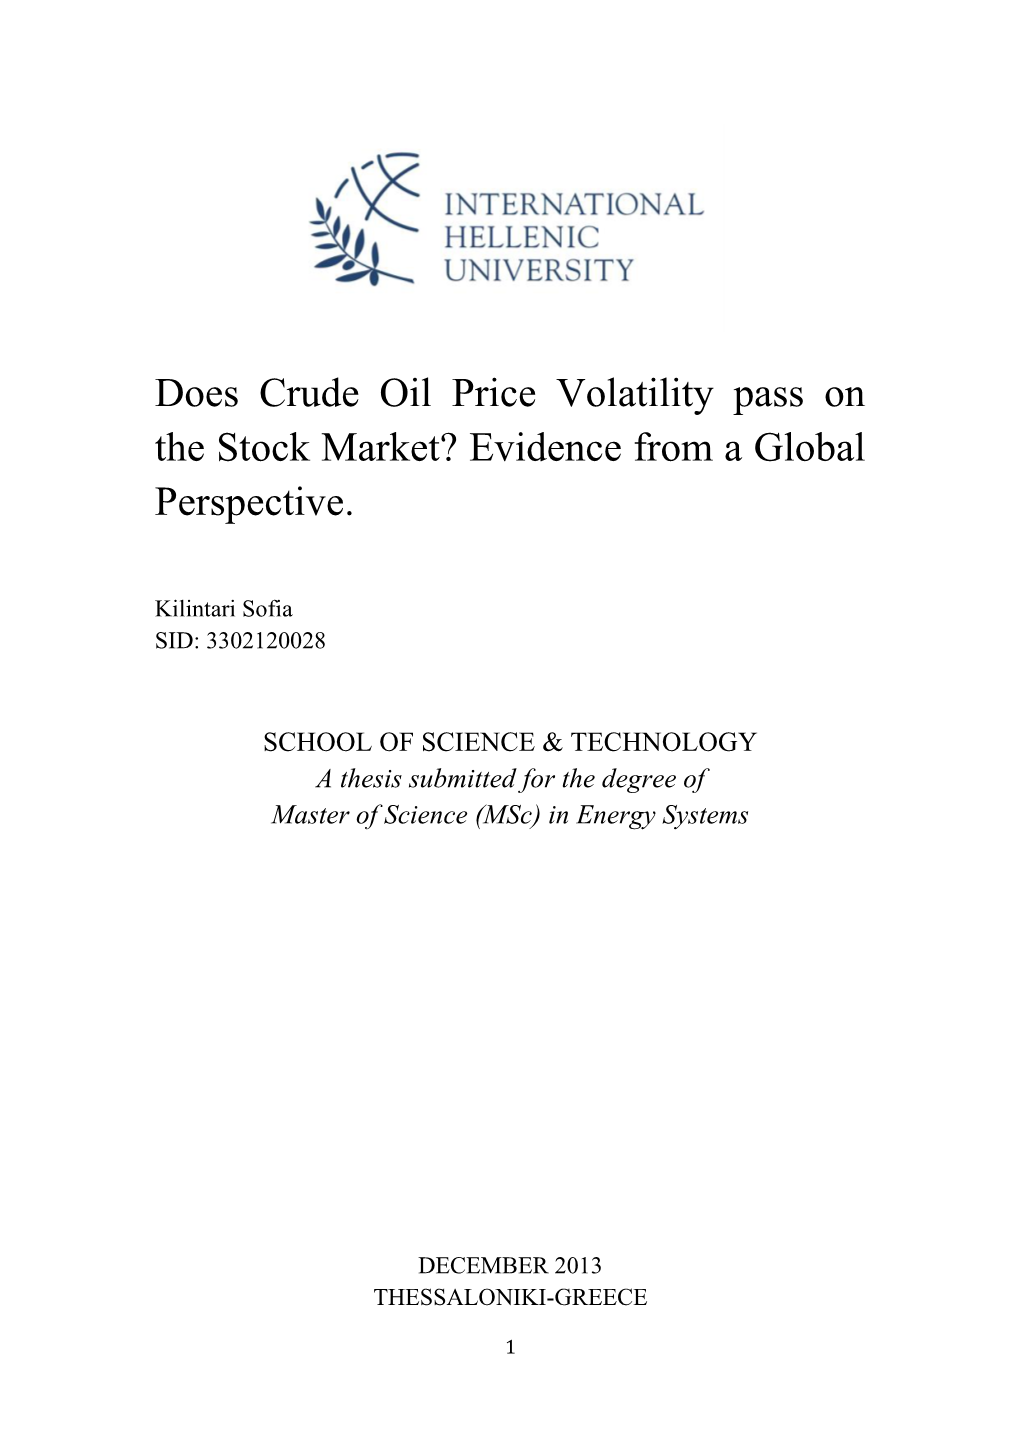 Does Crude Oil Price Volatility Pass on the Stock Market? Evidence from a Global Perspective